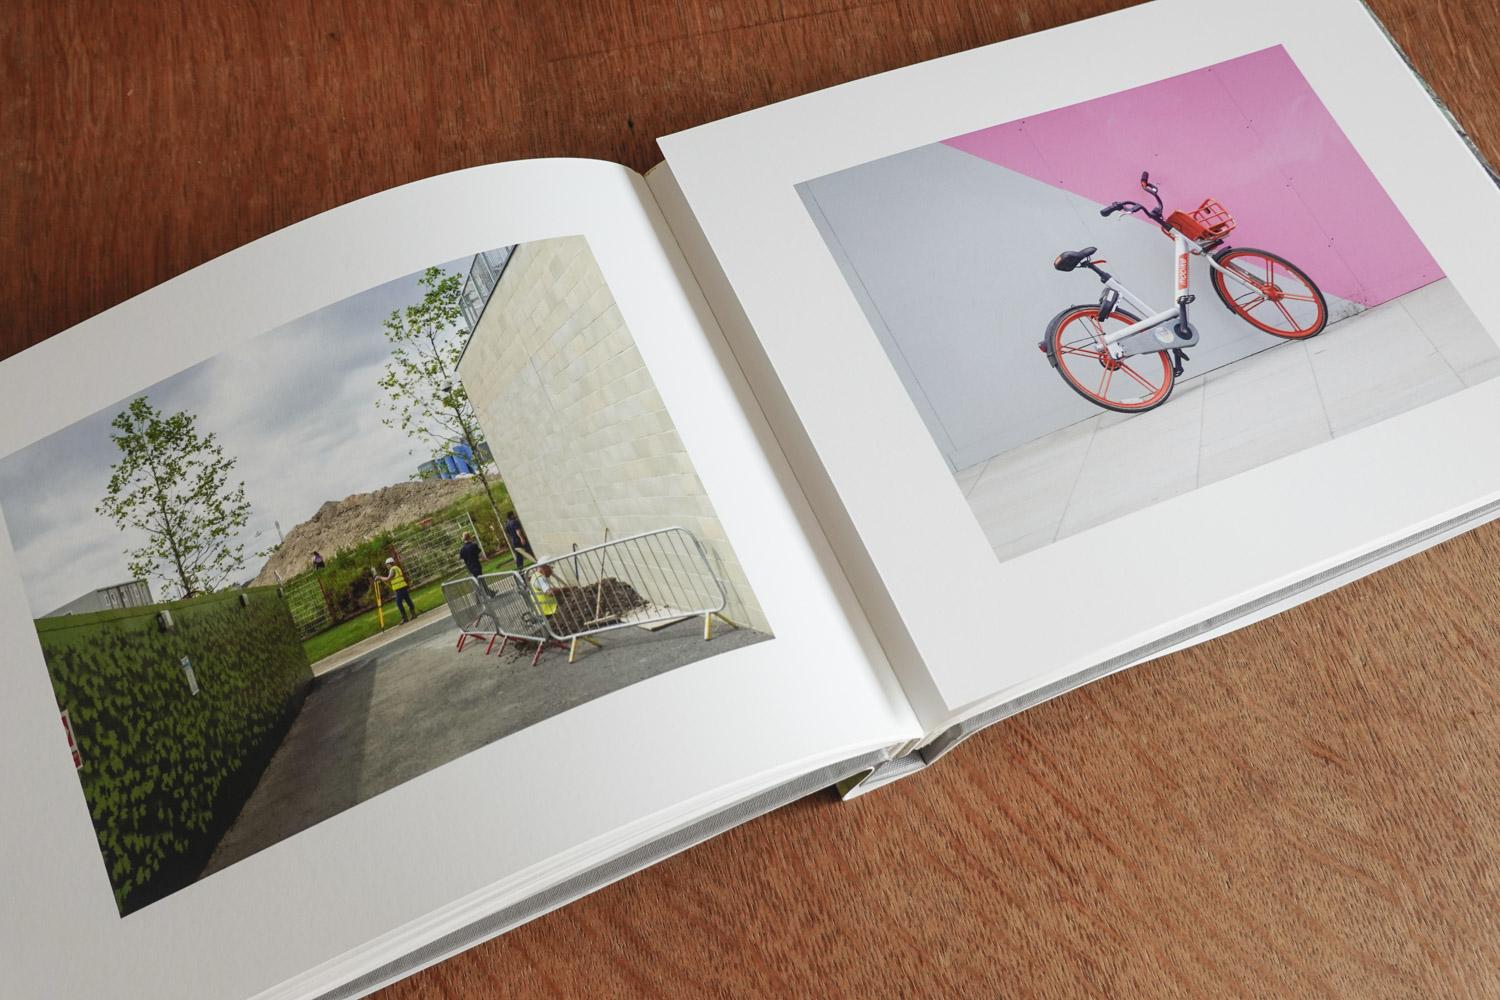 open books shows two photographs, one shows a scene with a surveyor in front of a large mound of earht, the other a rental bike stands against a pink and grey wall